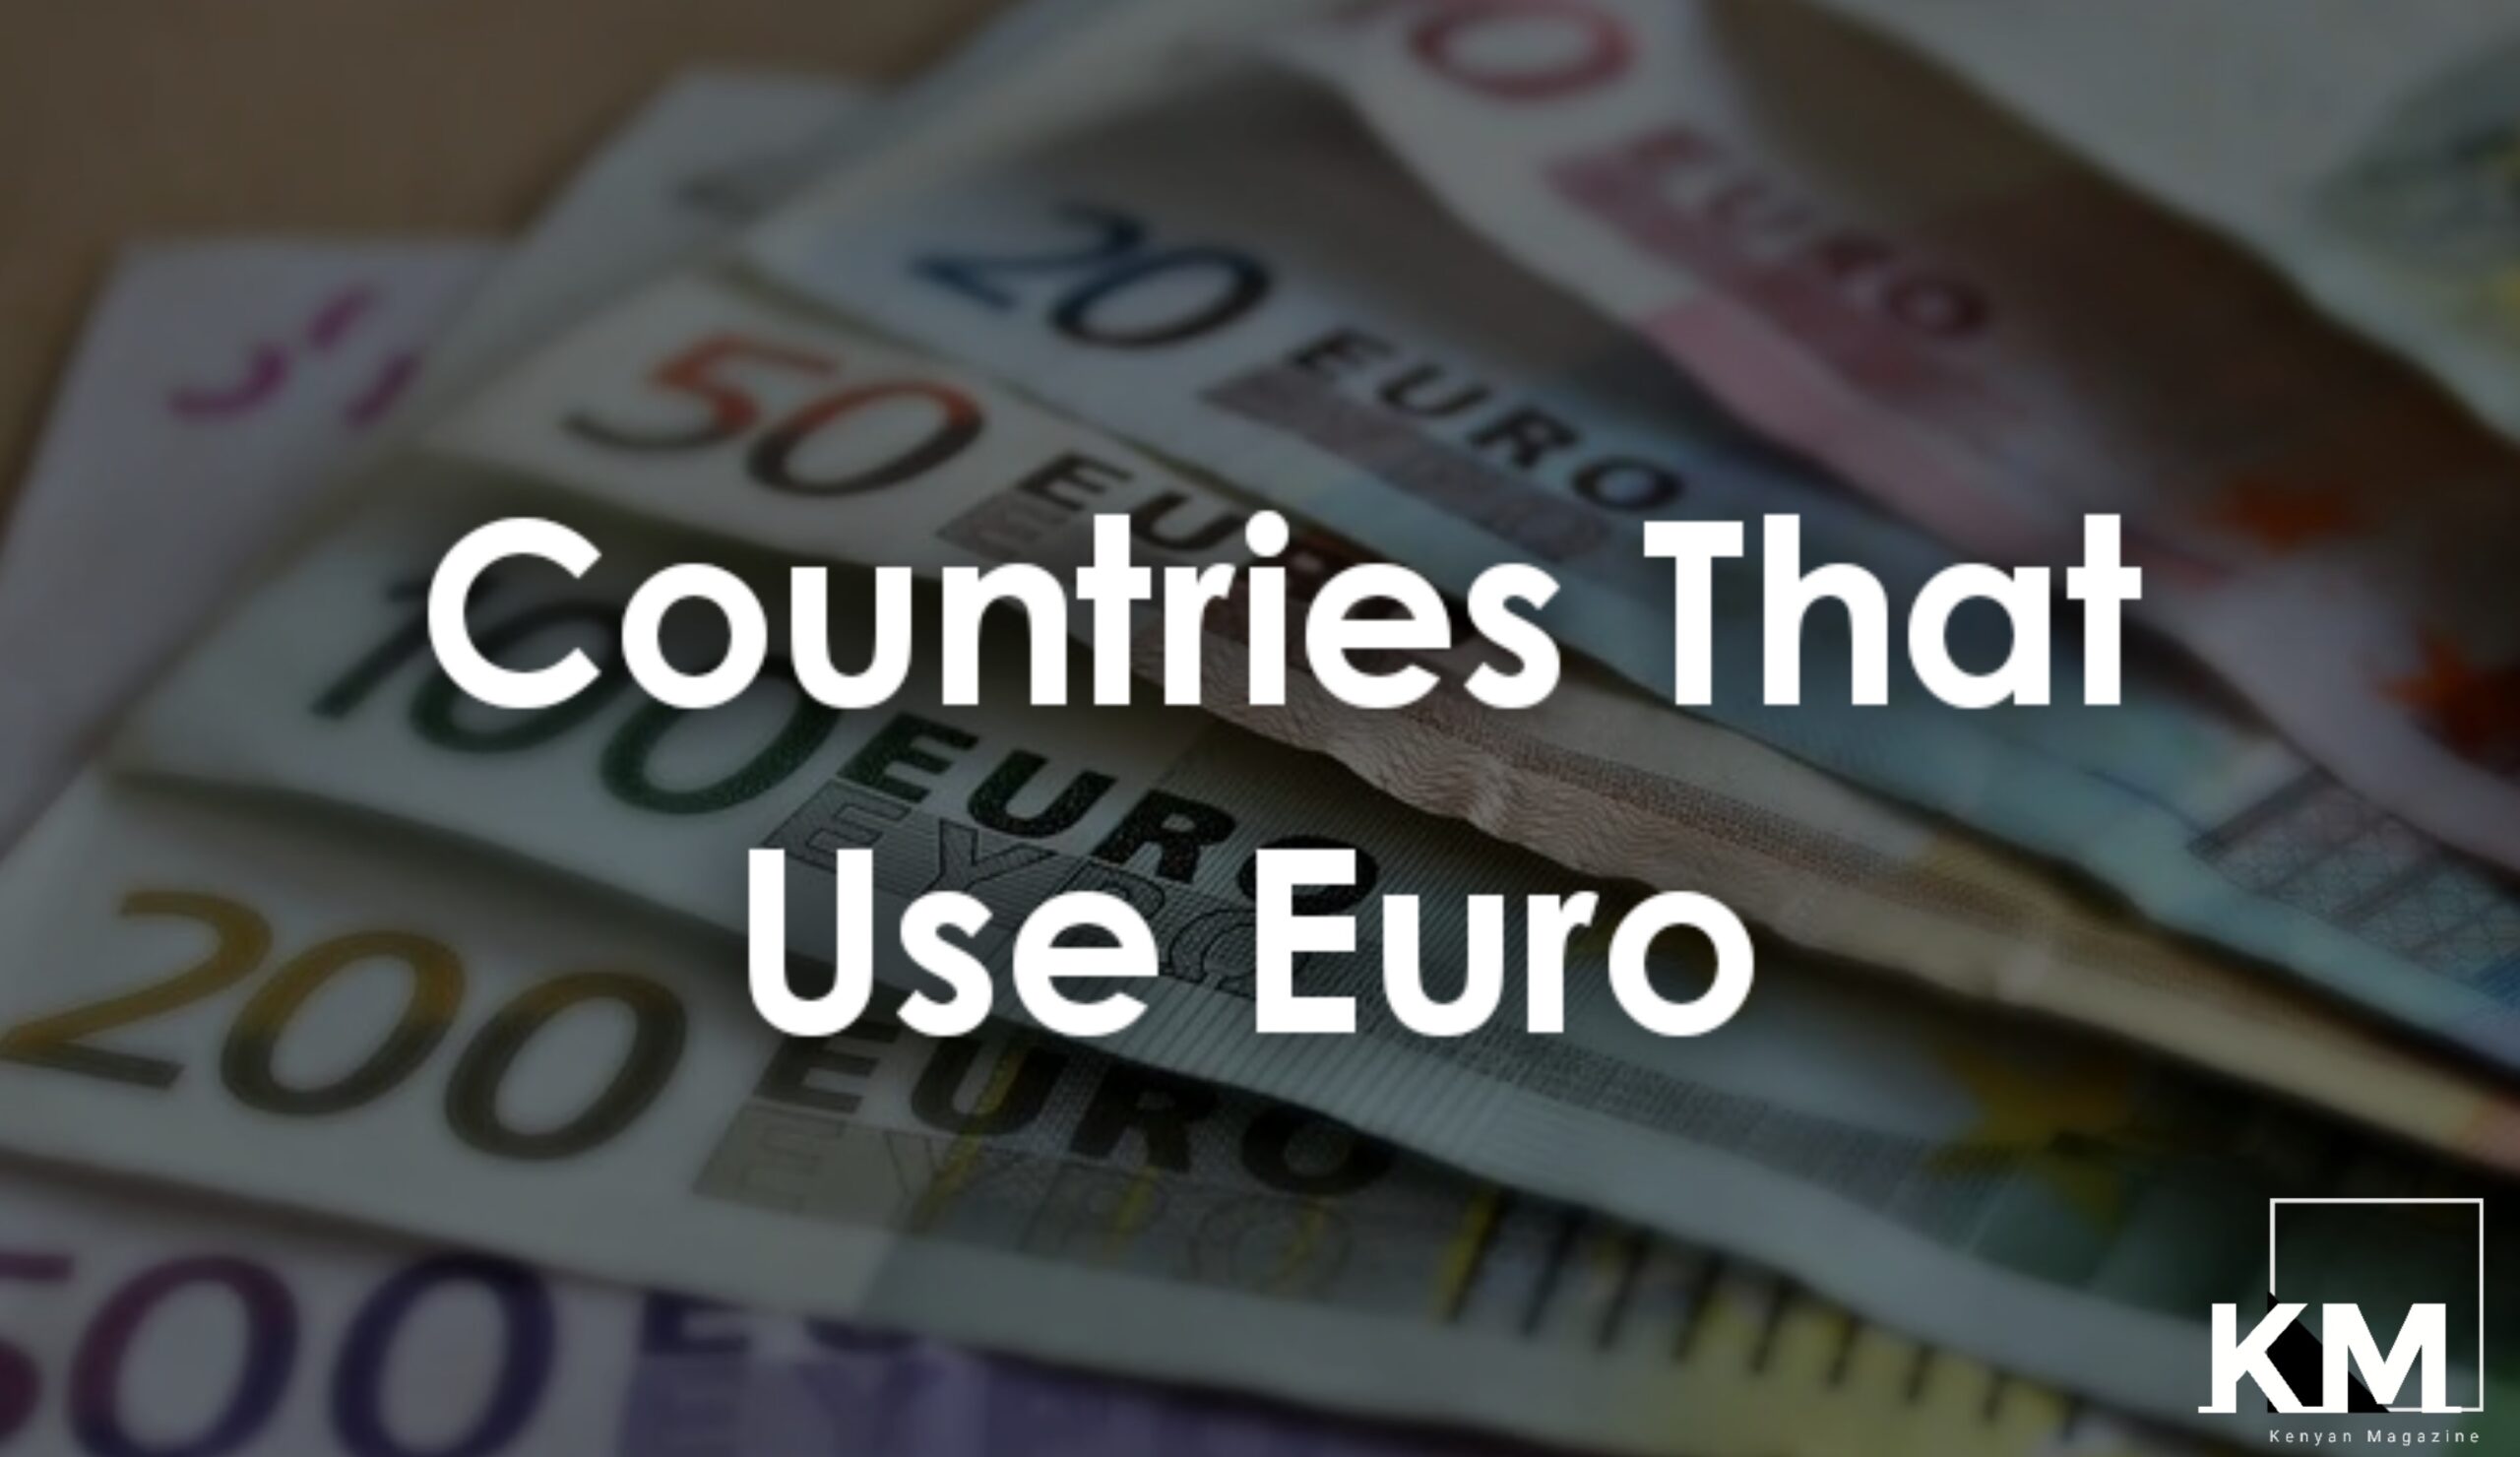 Countries that use Euro